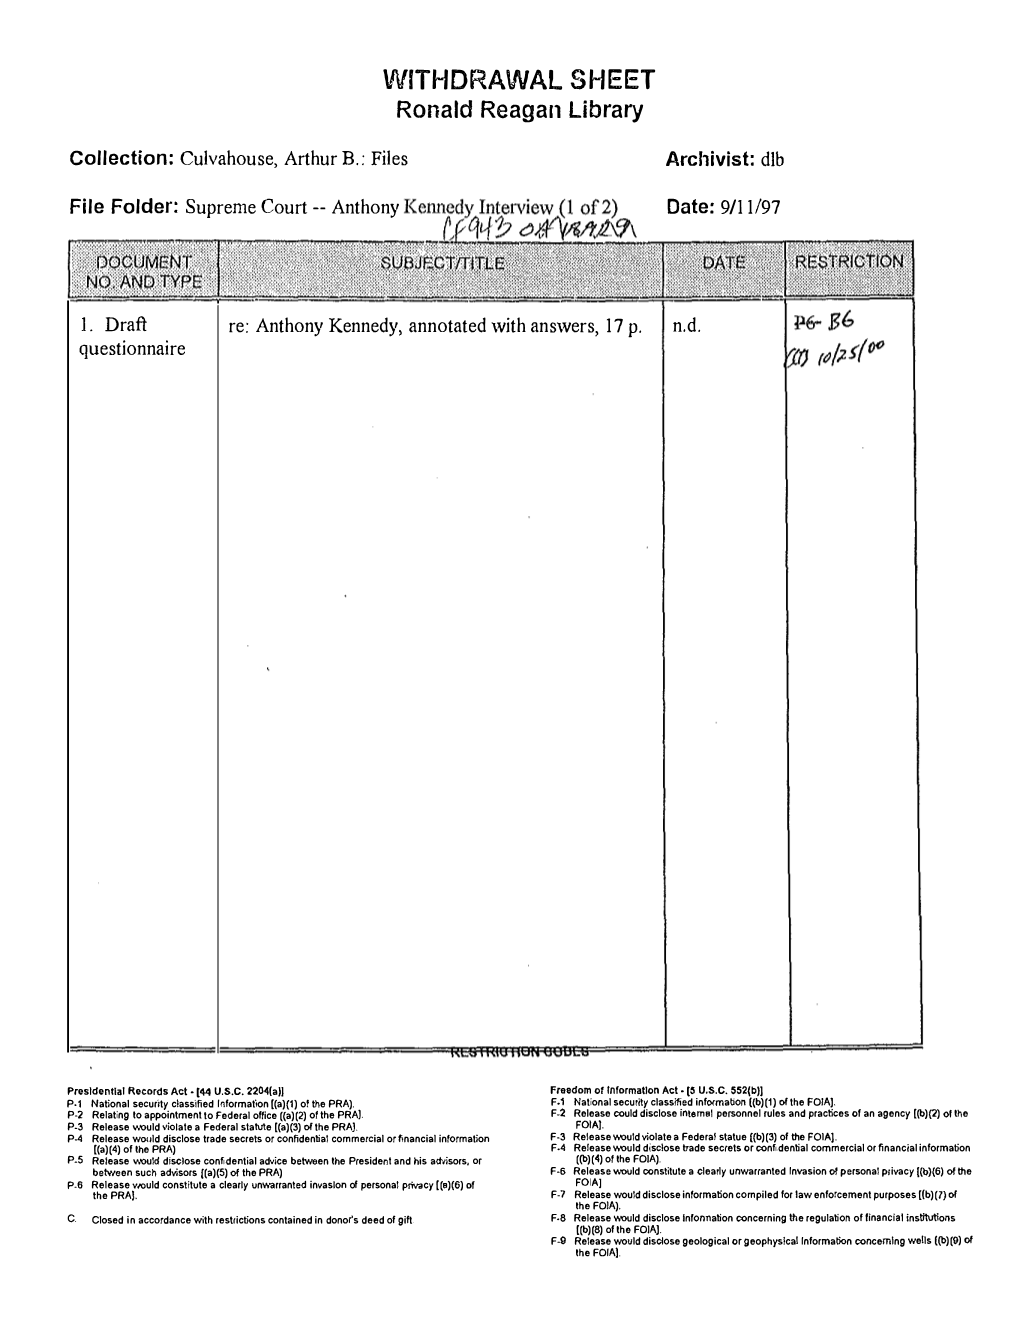 Documents Relating to the Nomination of Anthony Kennedy To